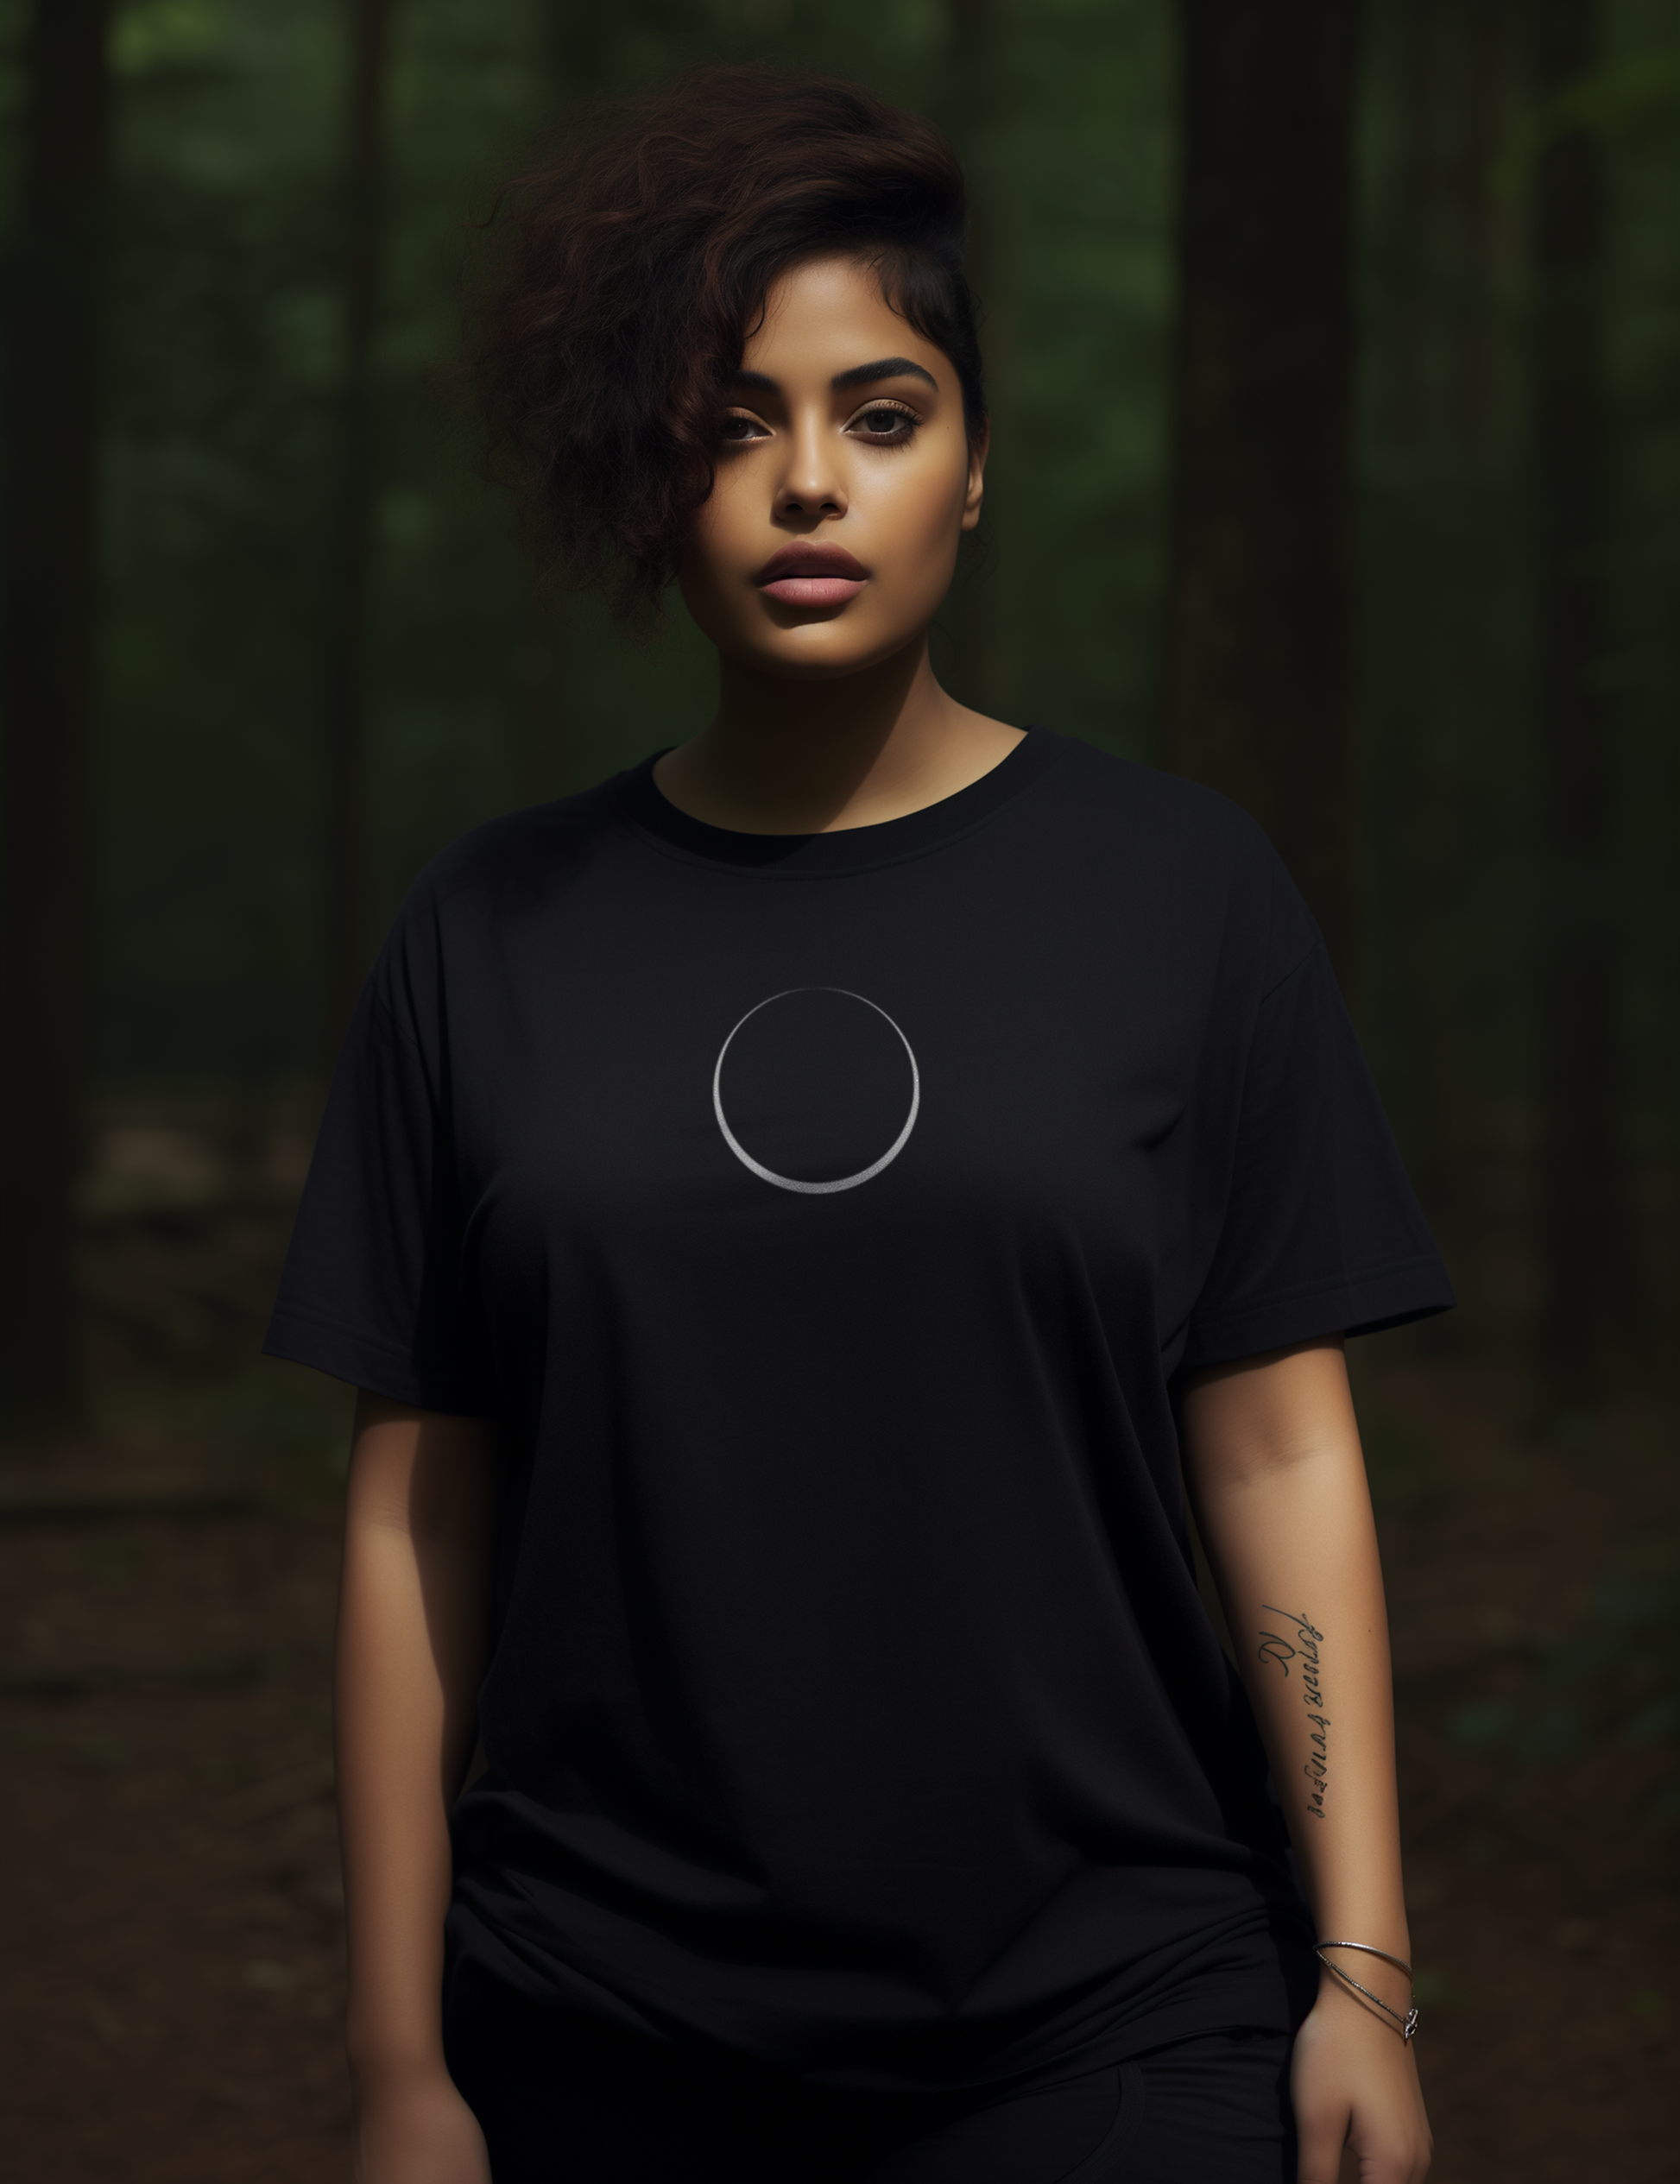 As Above So Below Elements Occult Esoteric Plus Size Goth Shirt